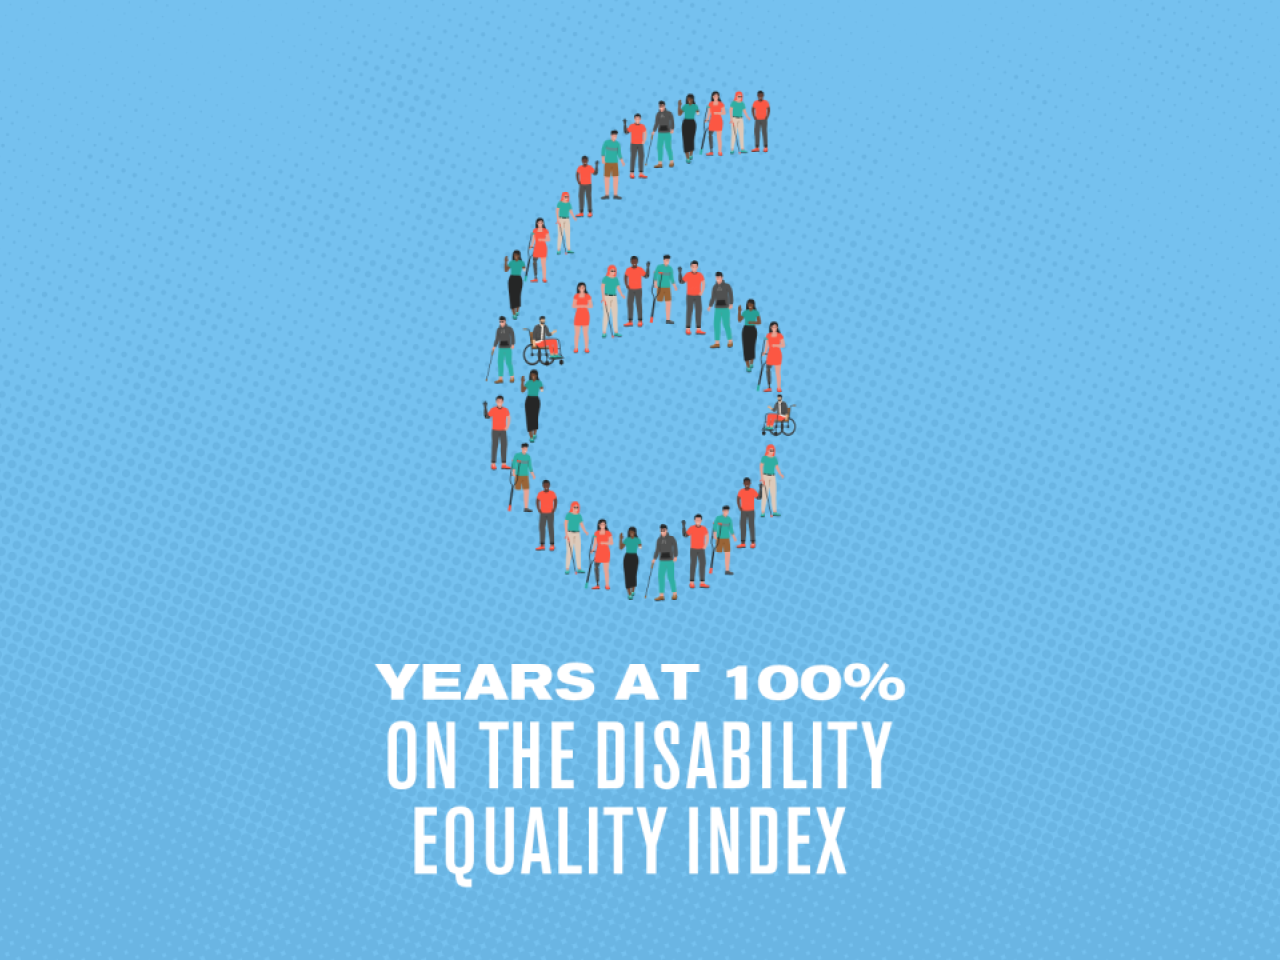 6 Years at 100% on the disability equality index